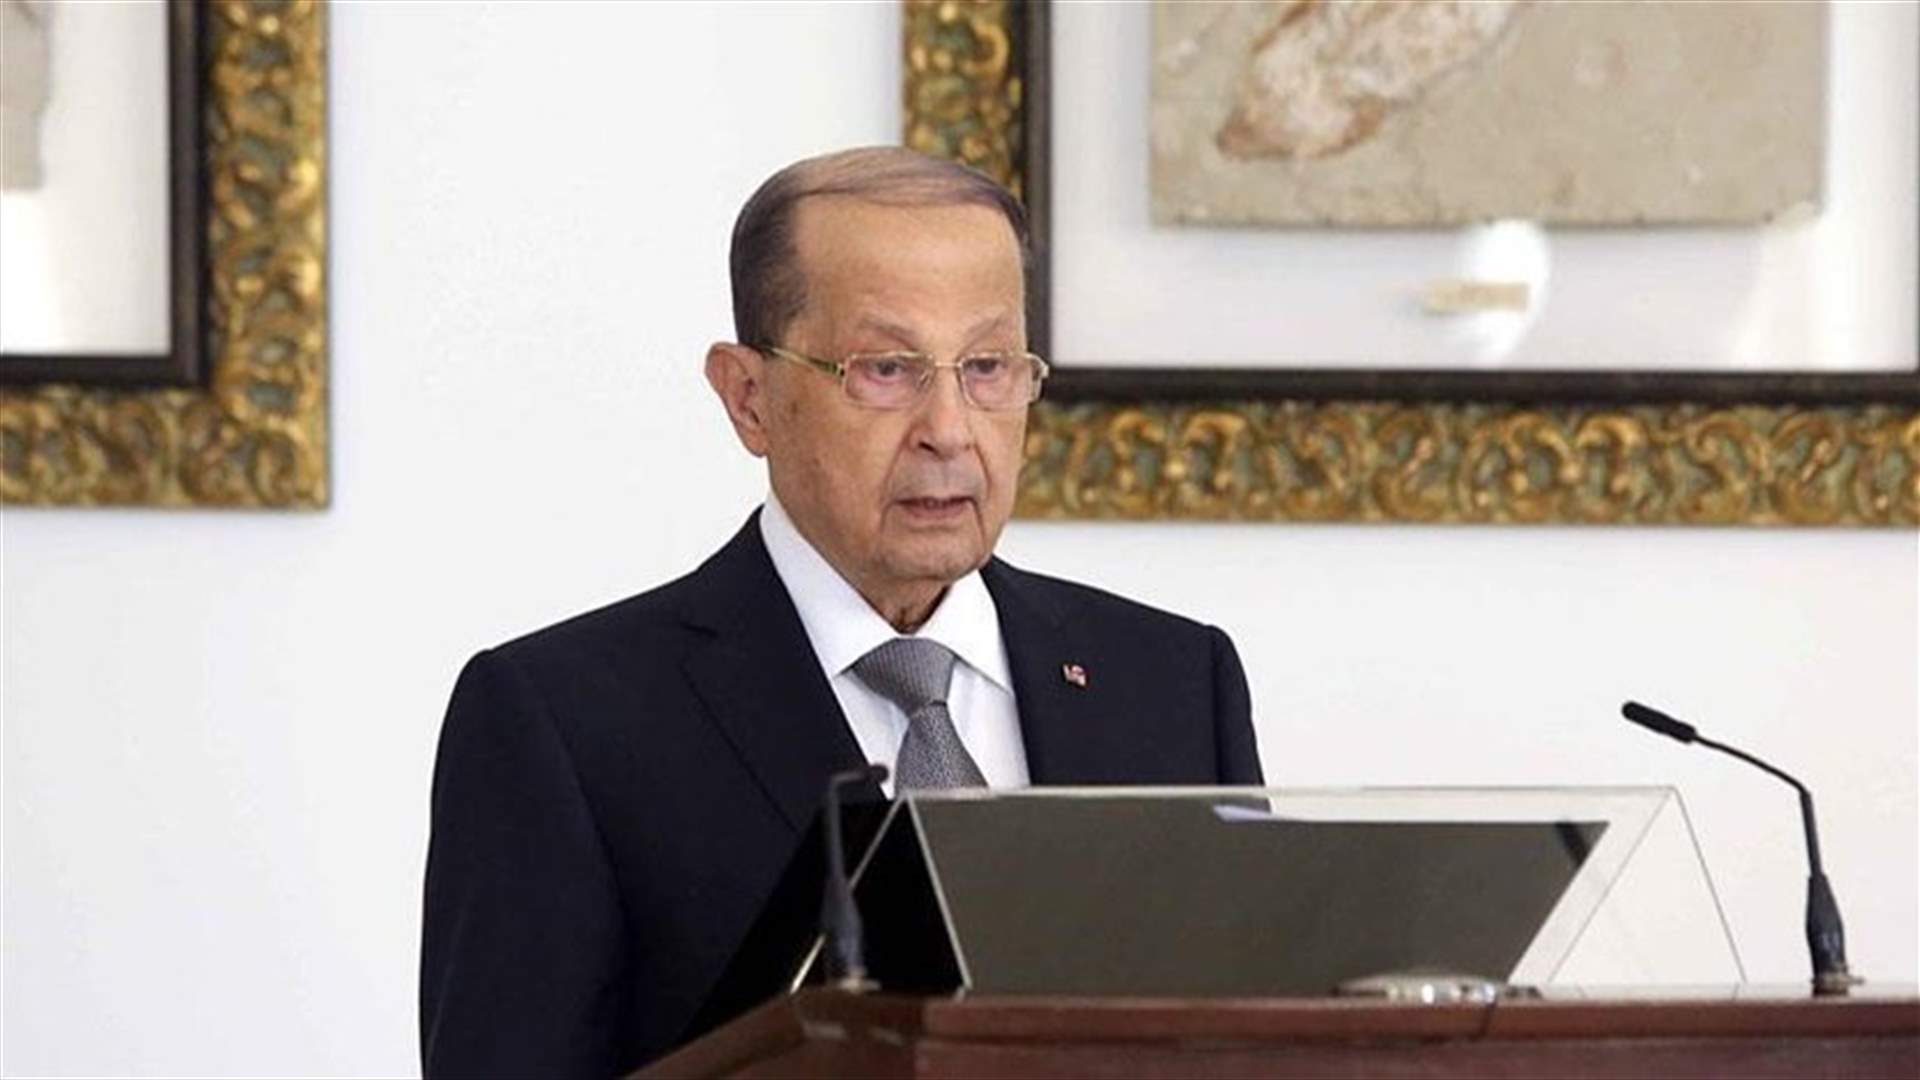 President Aoun says Lebanon is waiting for results of investigations into tunnels